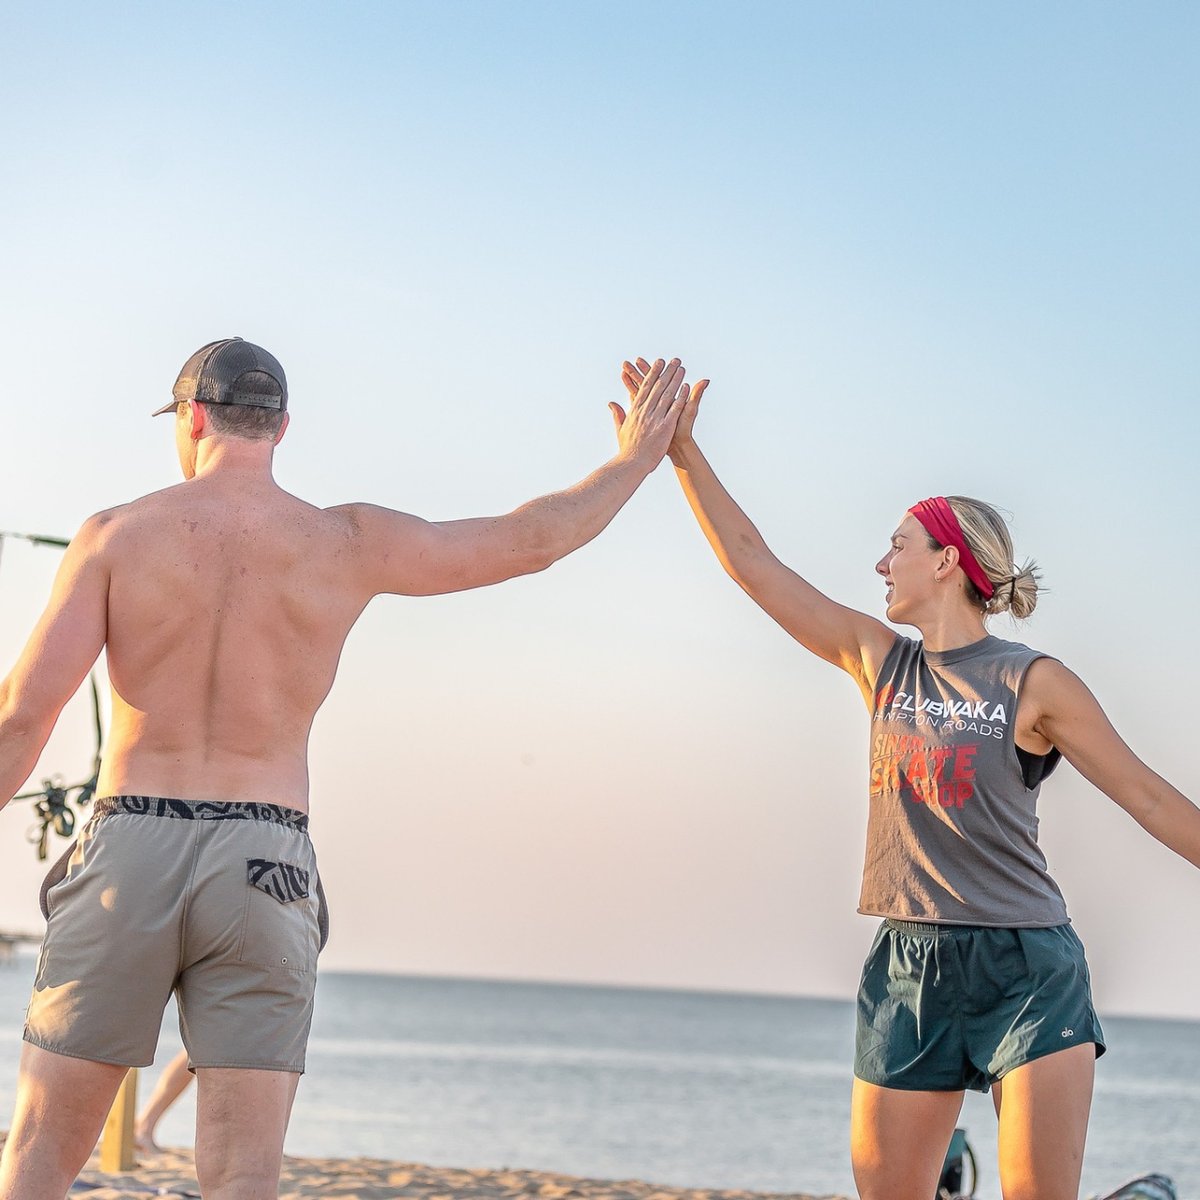 High fives at sunset! 🌅 Keeping the game alive with good vibes and great tides.

Summer Beach Volleyball leagues return to Ocean View Beach in June. Register now at clubwaka.com/hampton-roads 🏐 #beachvolleyball #clubwaka #volleyball